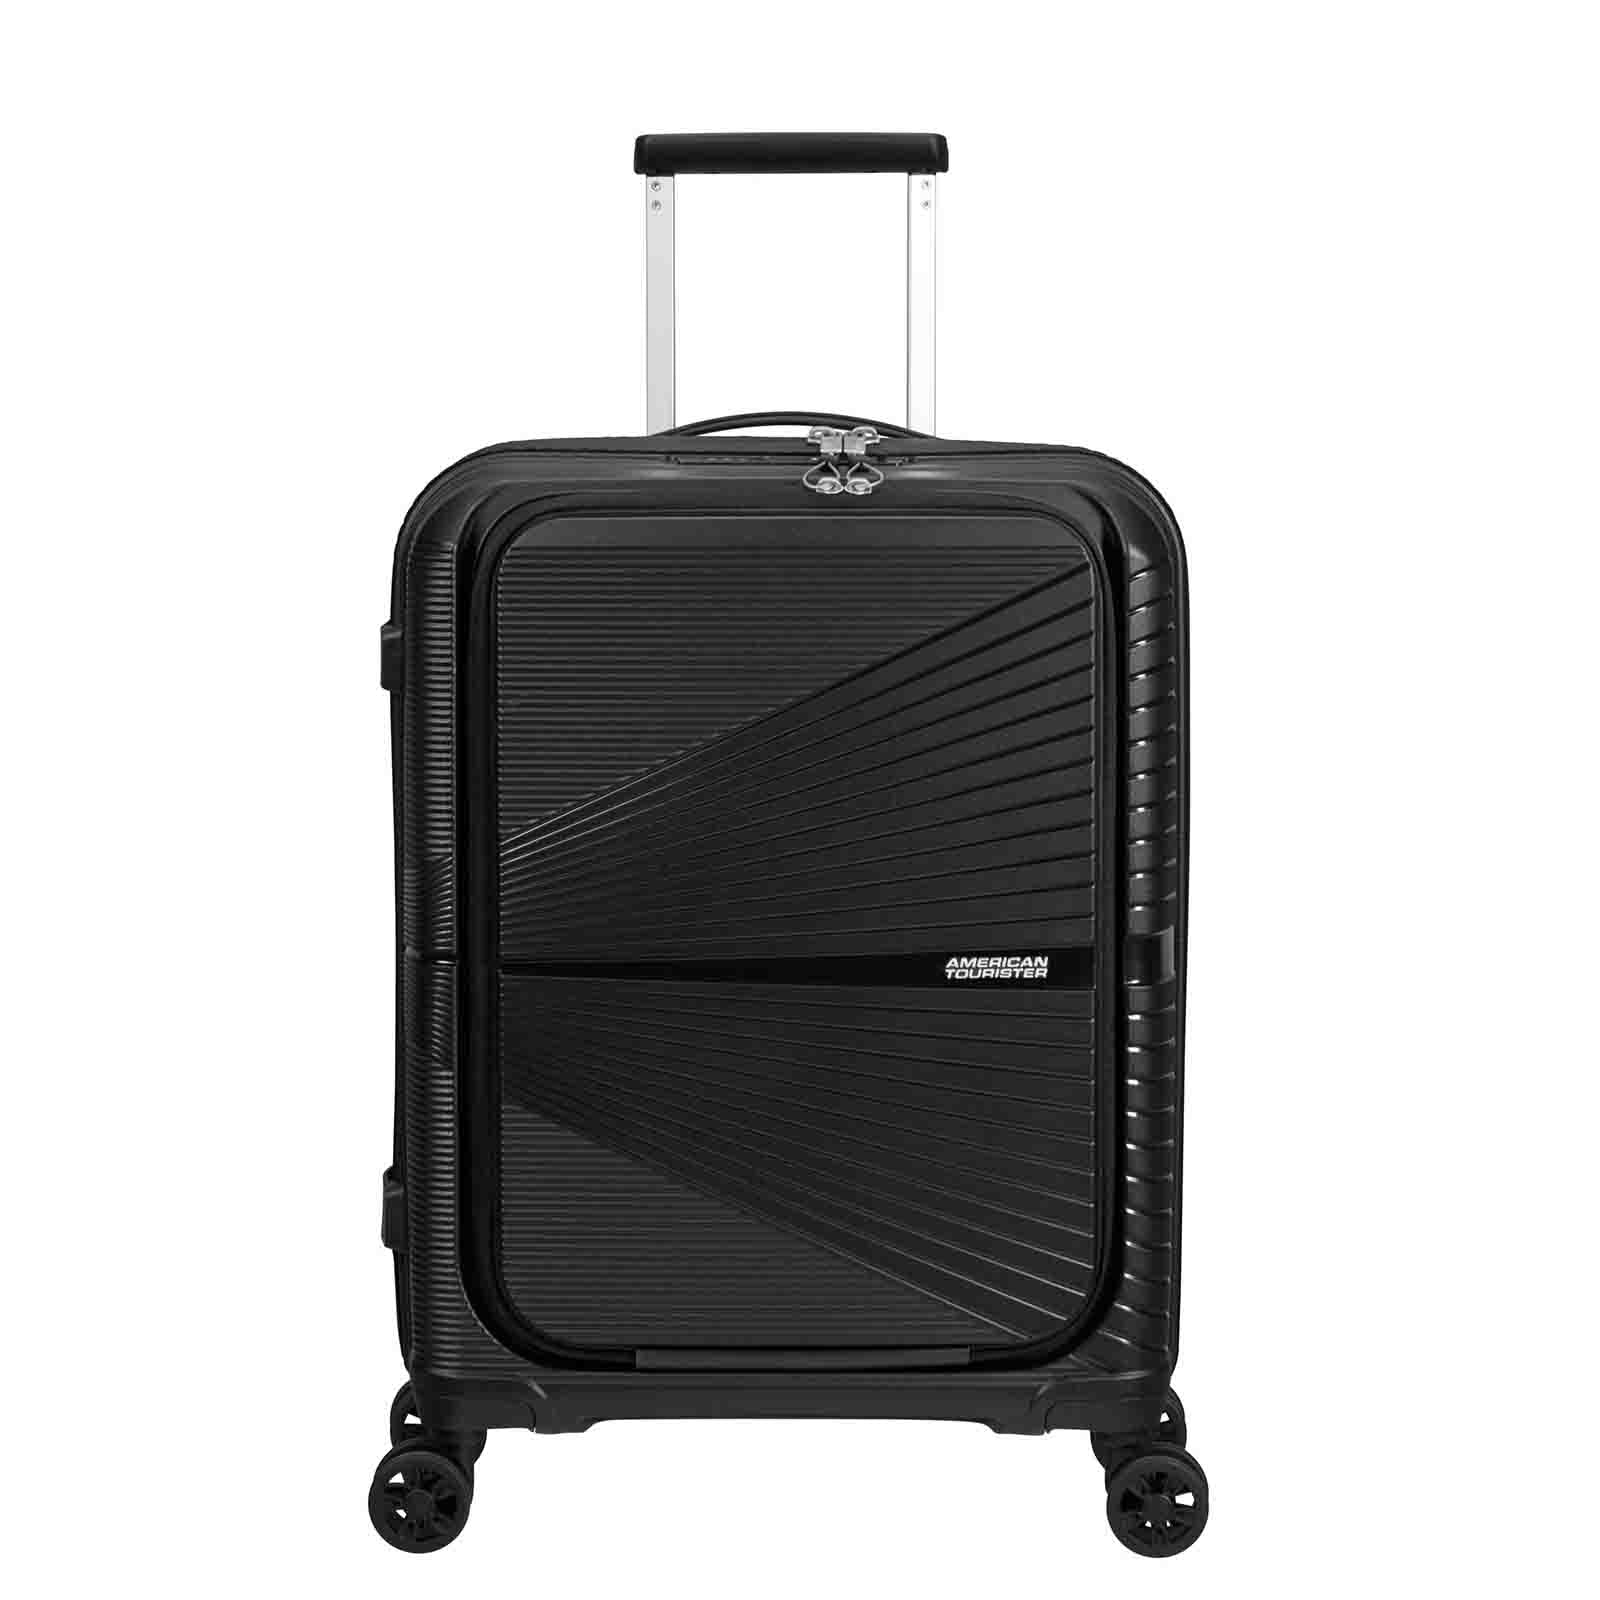 American-Tourister-Airconic-55cm-Suitcase-Front-Opening-Onyx-Black-Front